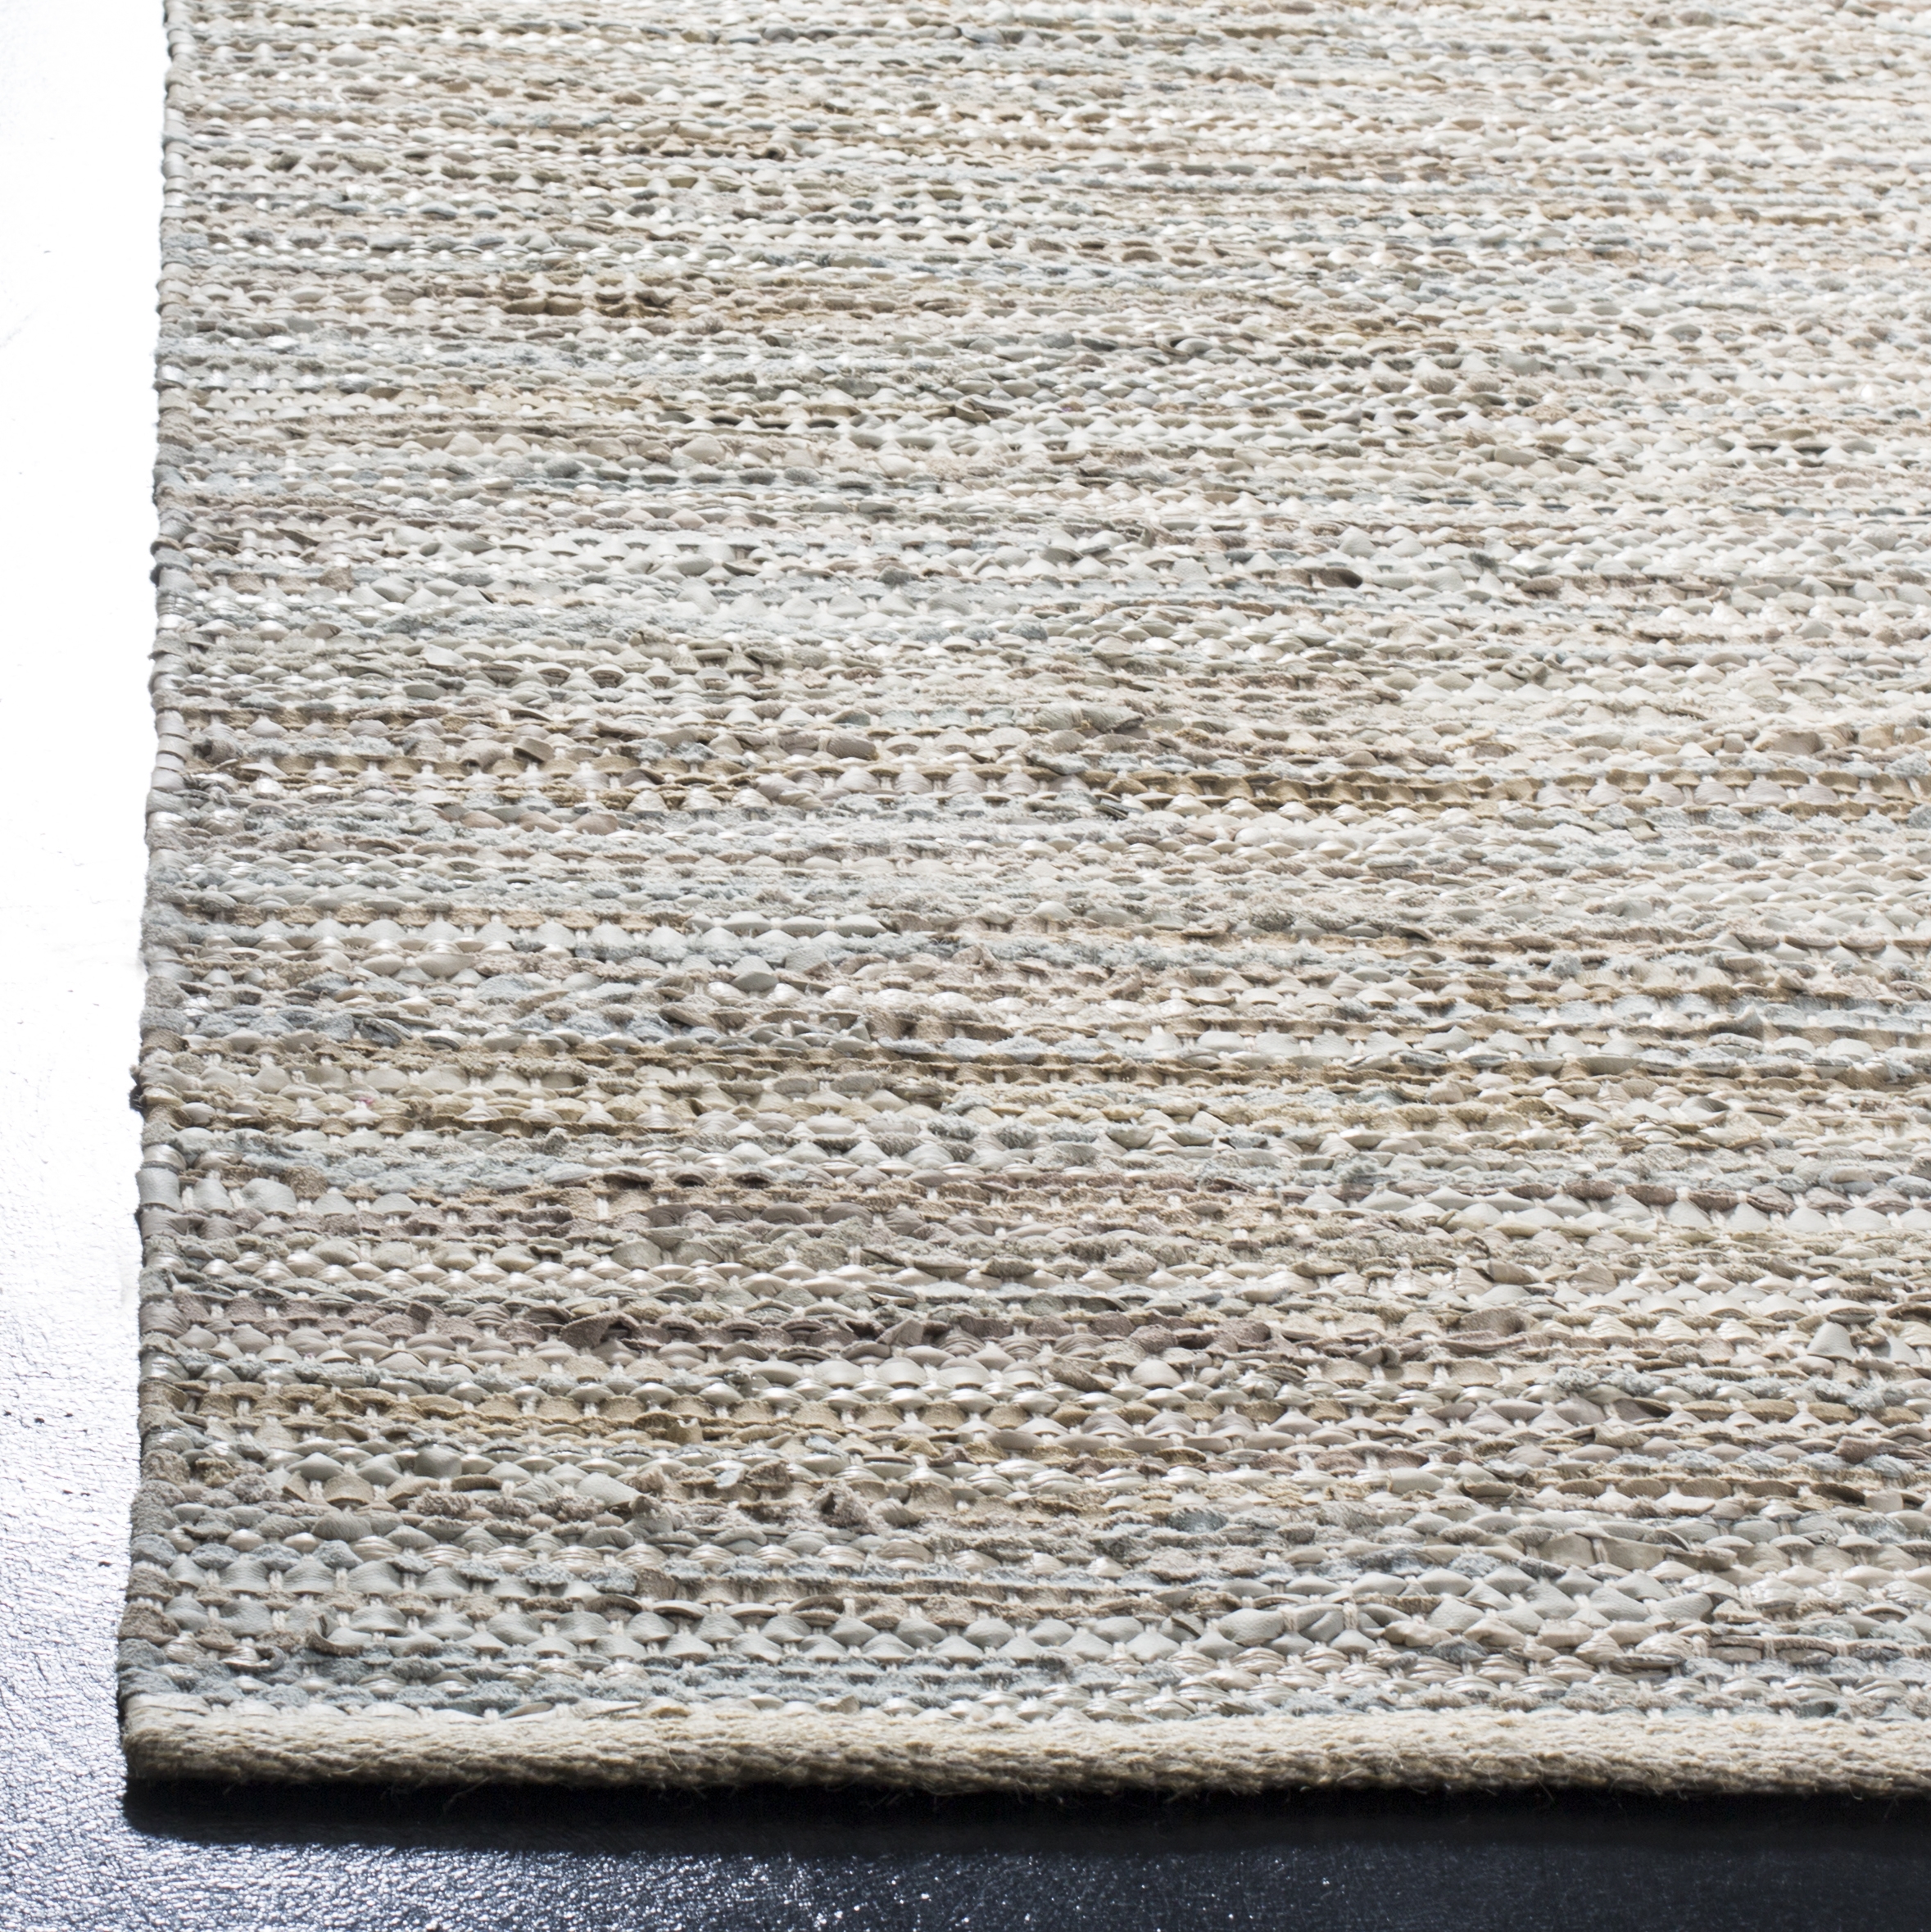 Arlo Home Hand Woven Area Rug, VTL105B, Beige,  6' X 6' Square - Image 1